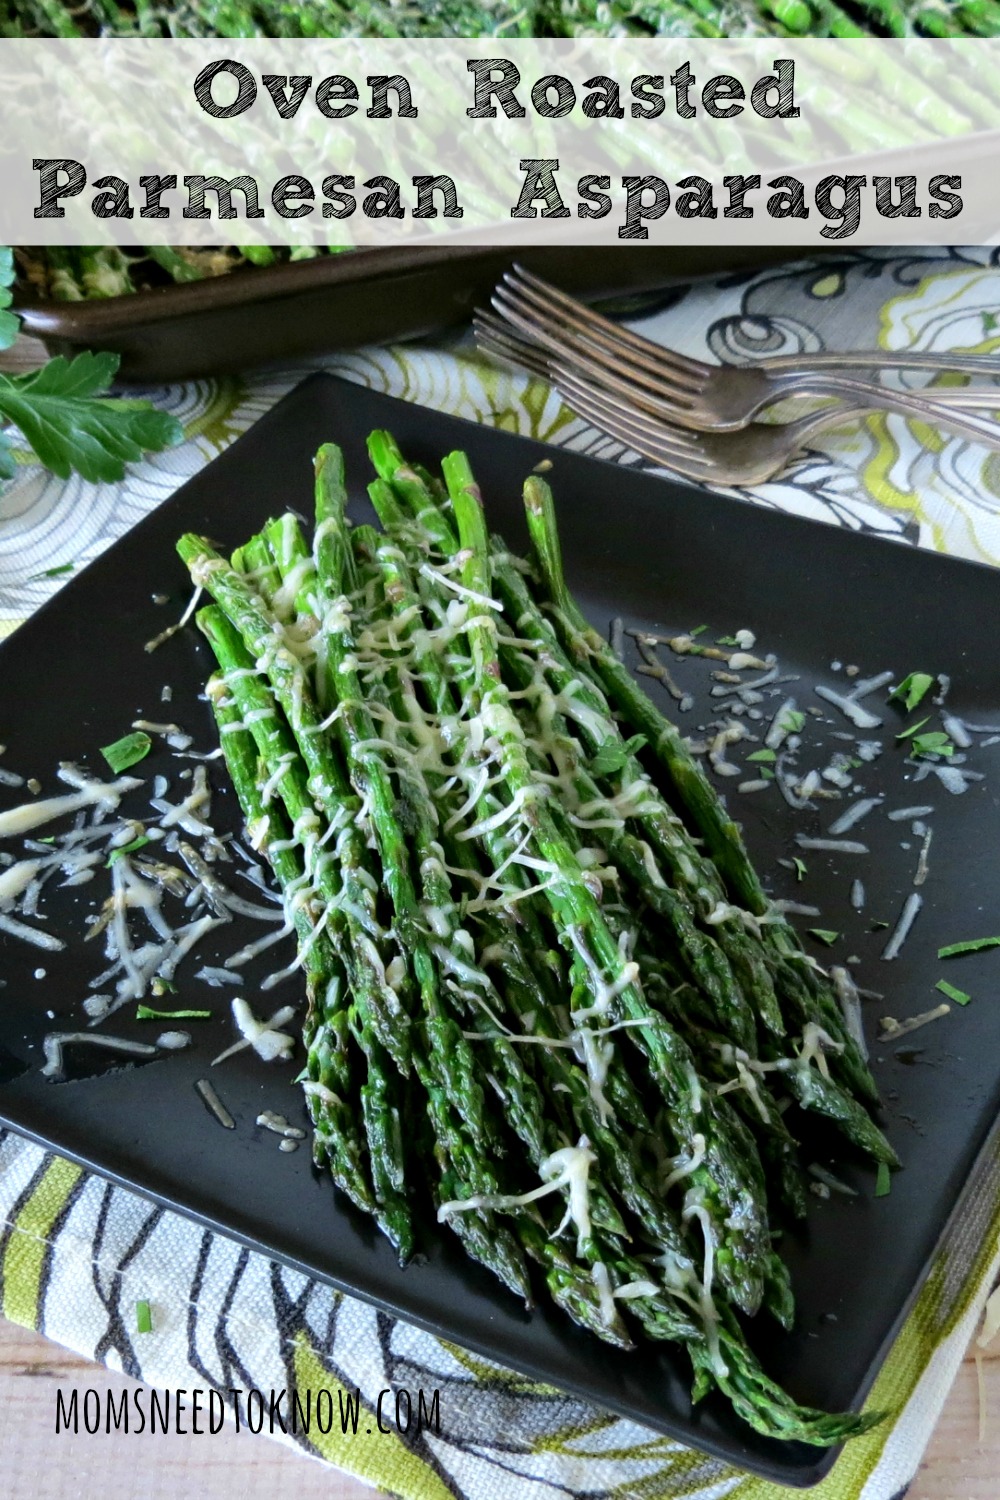 This baked asparagus with Parmesan is so simple and allows the flavors to just shine. The perfect side dish any night of the week!